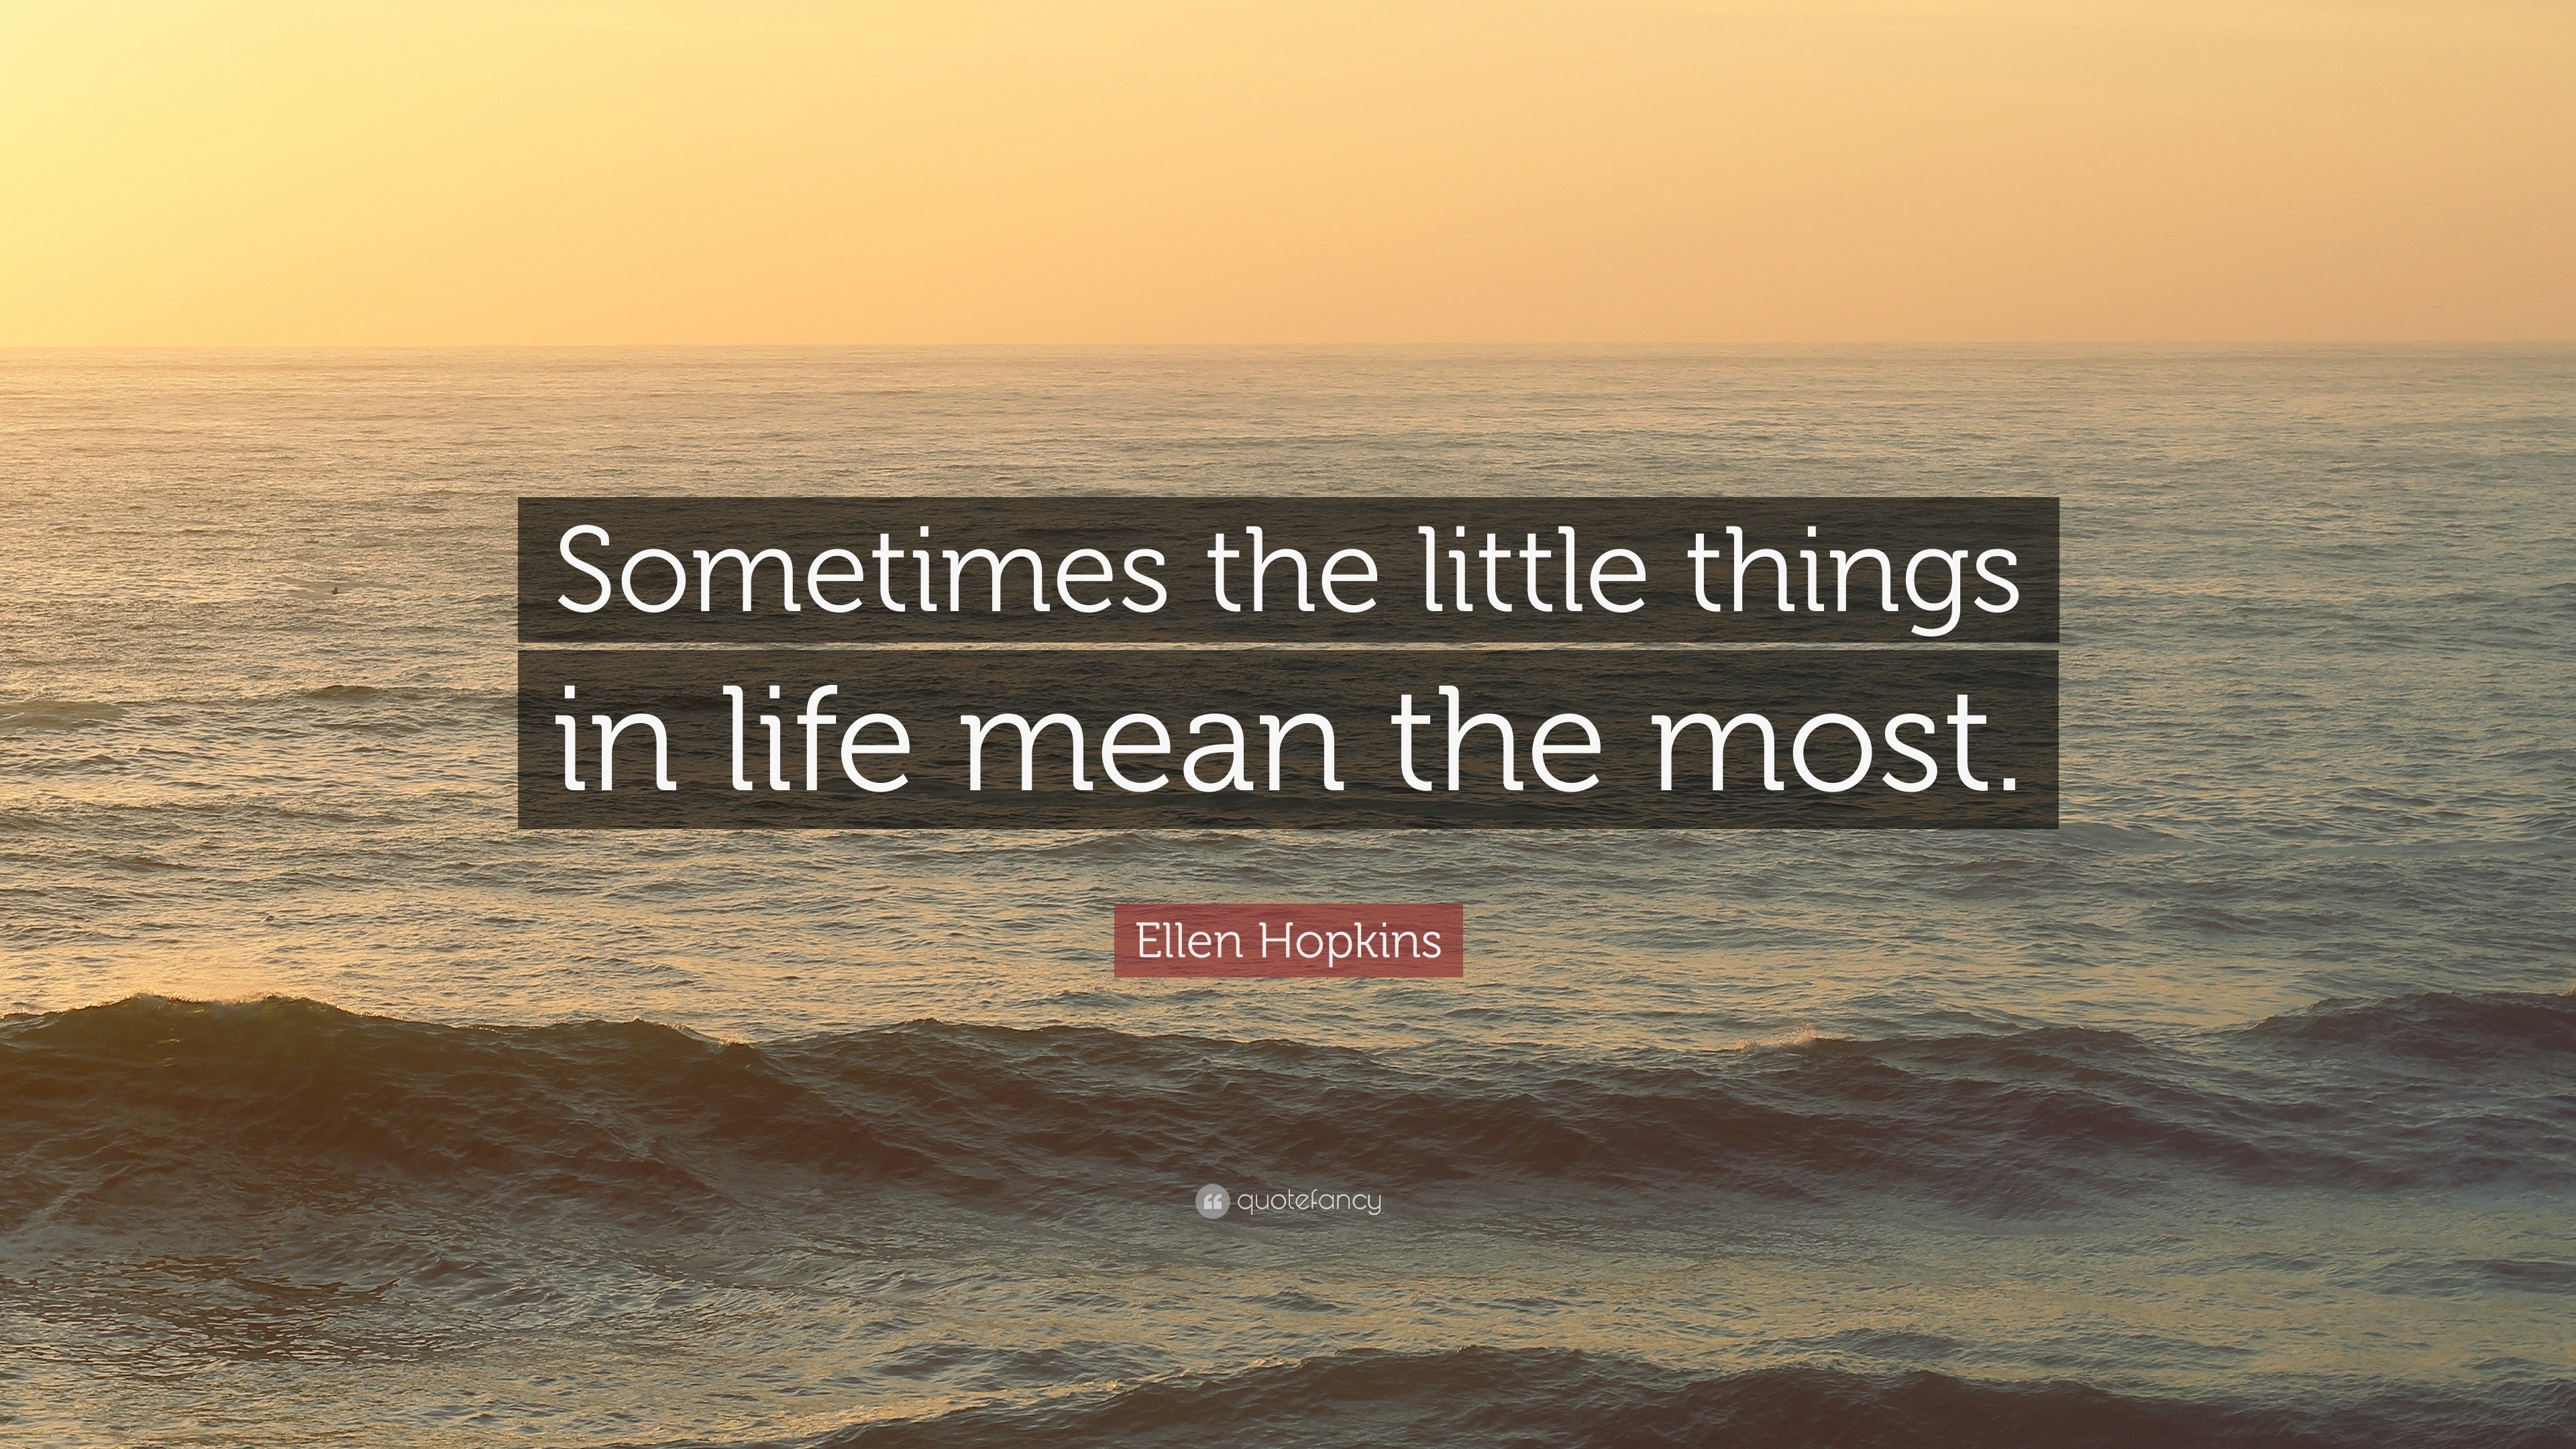 Ellen Hopkins Quote: “Sometimes the little things in life mean the most.”